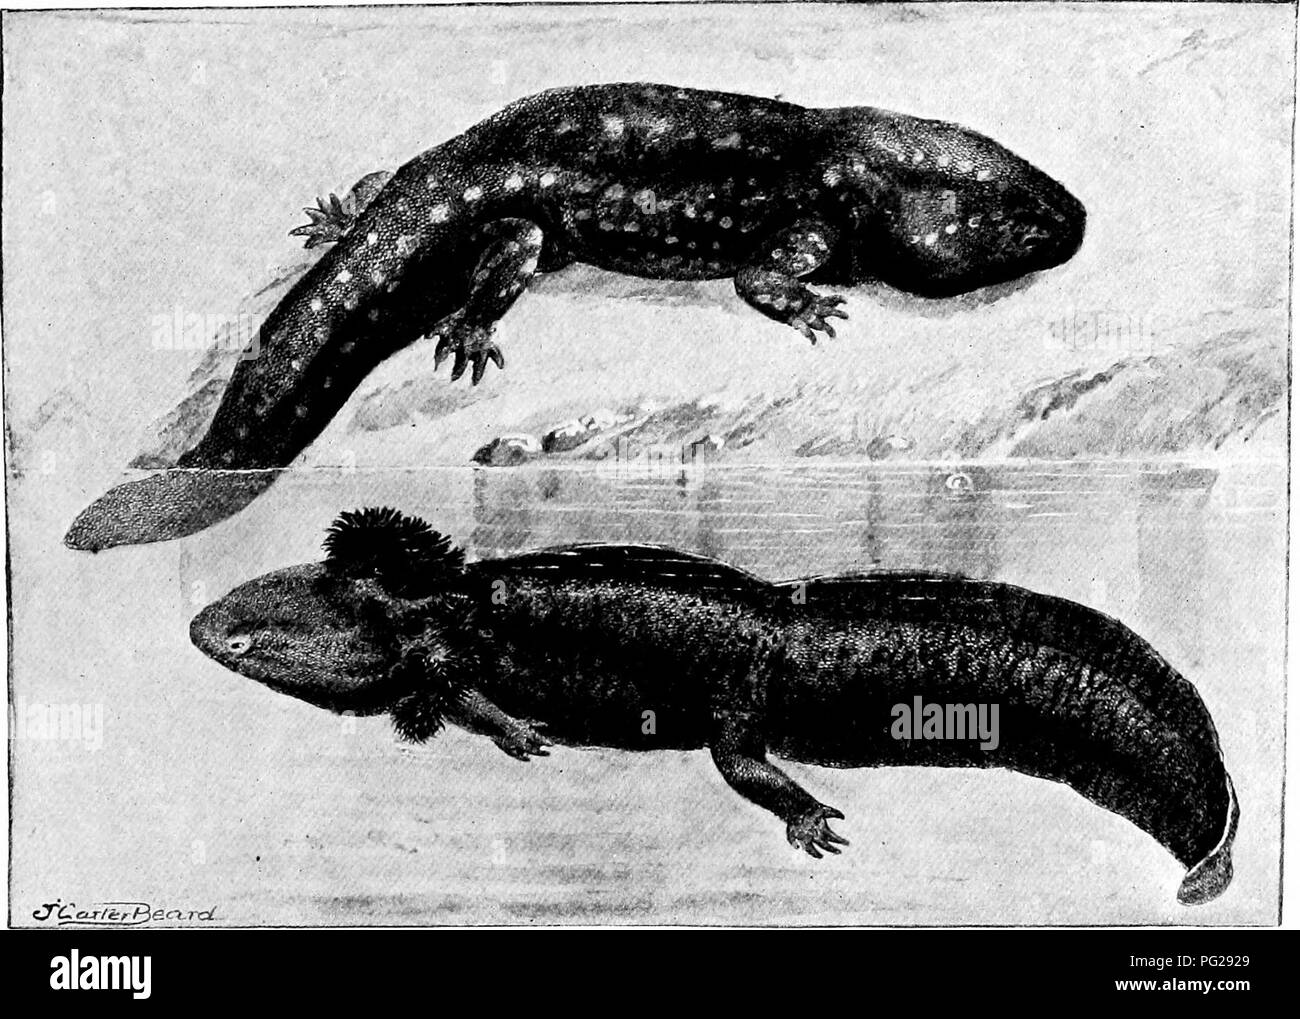 The American Natural History A Foundation Of Useful Knowledge Of The Higher Animals Of North America Natural History The Salamanders 367 The Two Lives Of The Axolotl The Lower Figure Shows